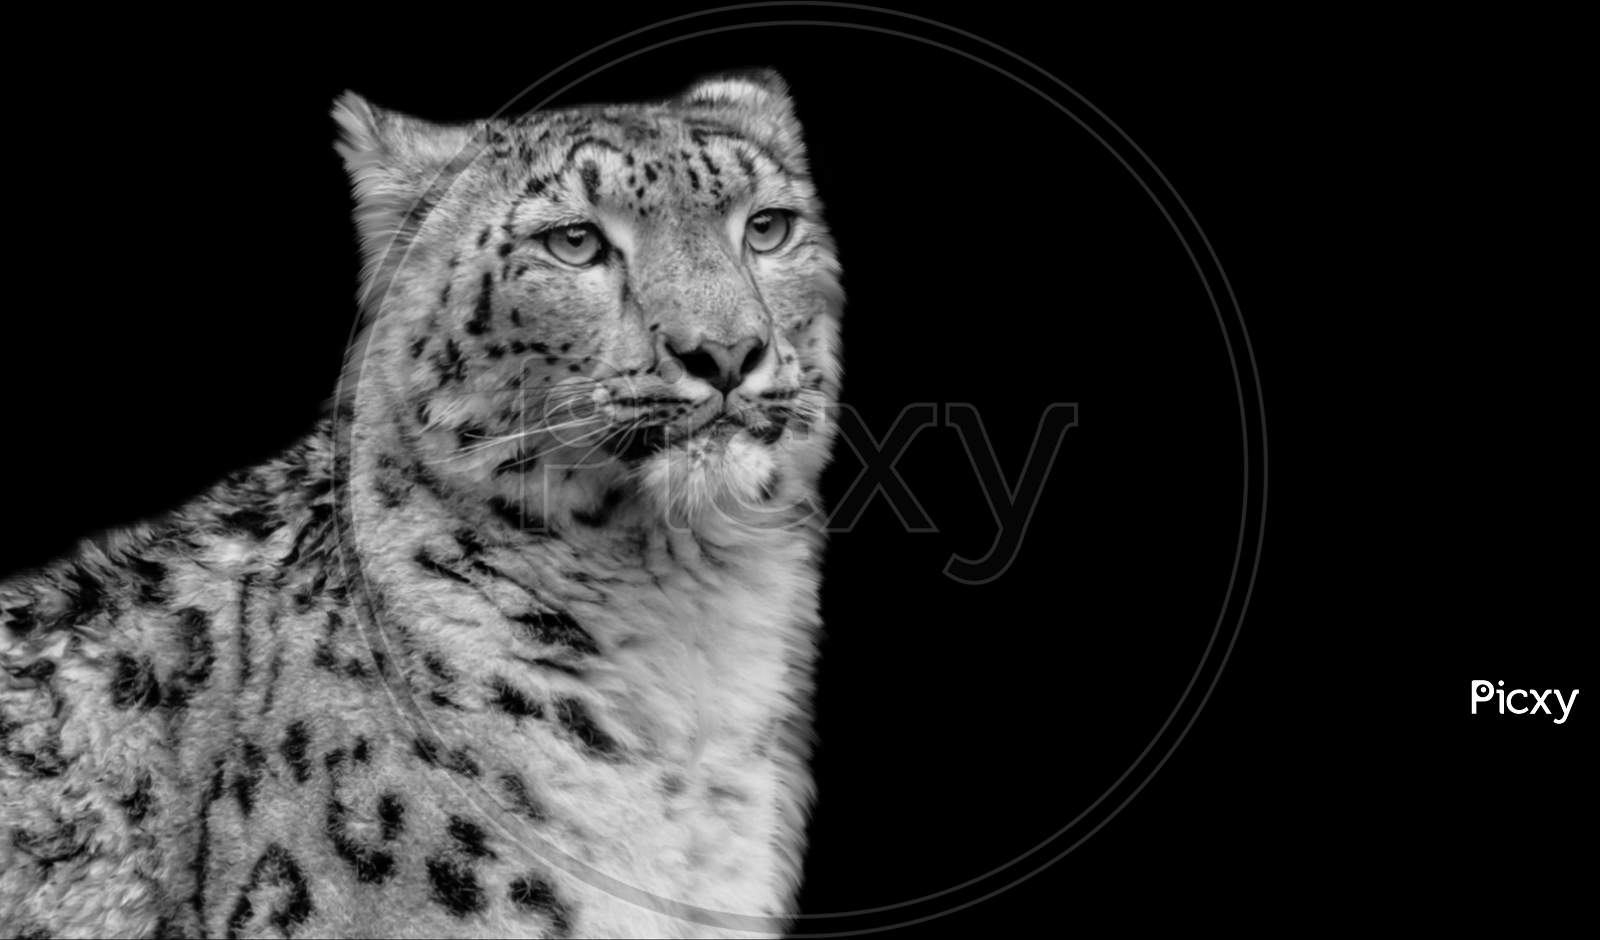 Black And White Snow Leopard Portrait In The Black Background